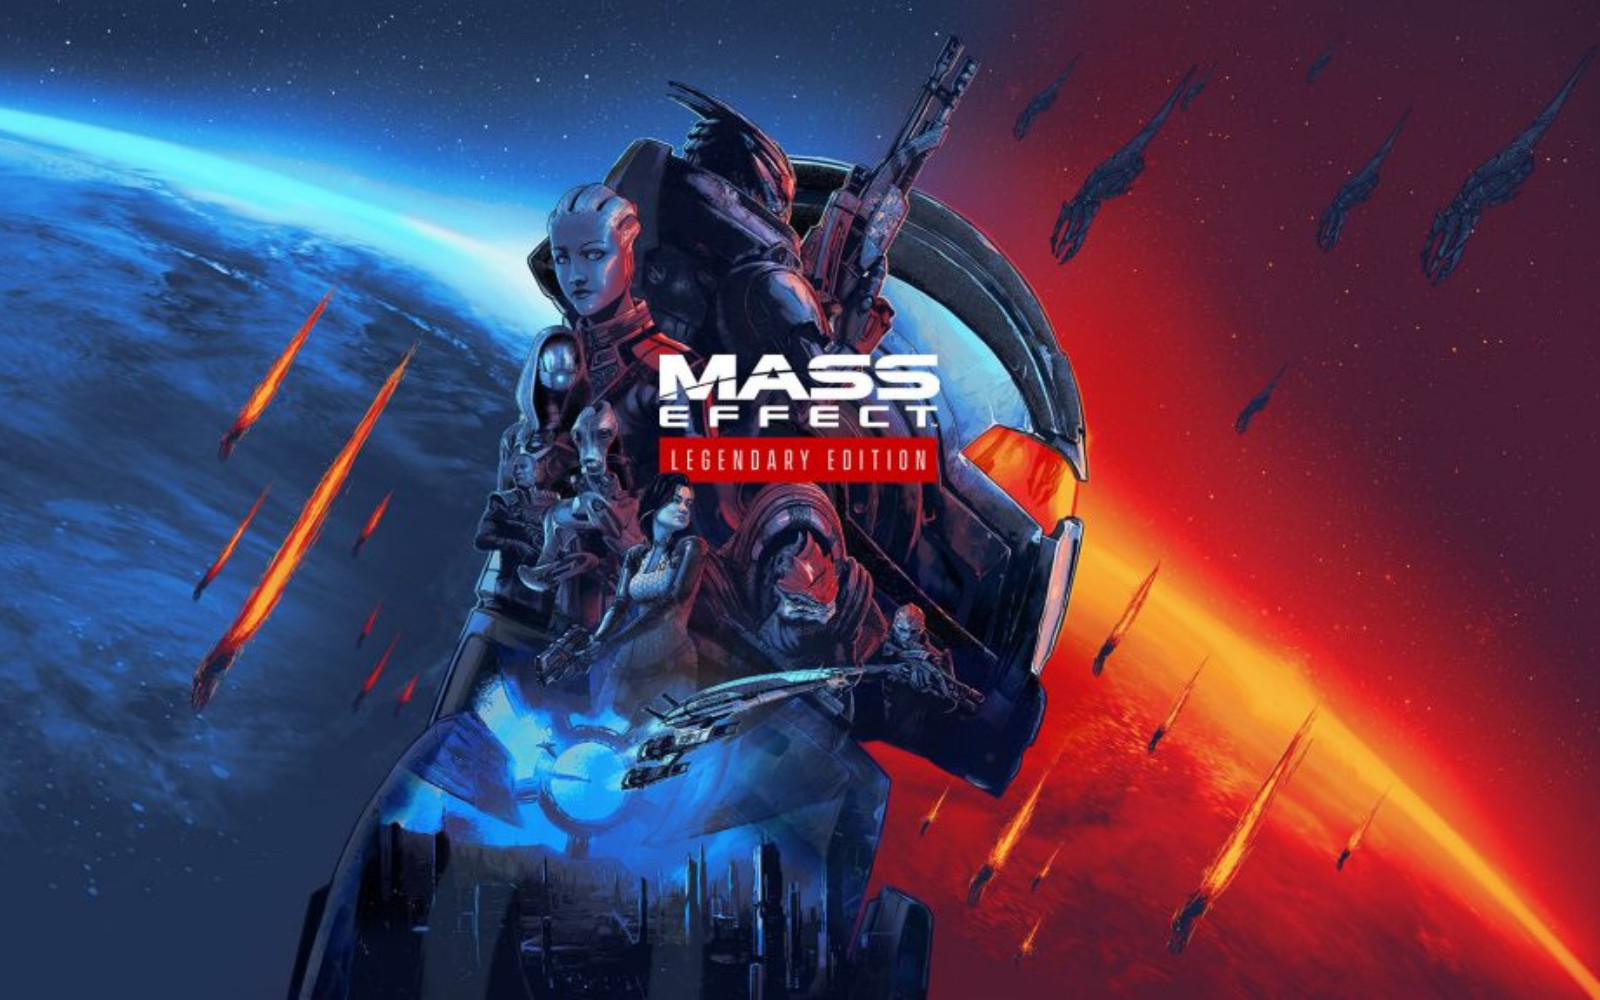 BioWare details the game changes coming with ‘Mass Effect: Legendary Edition’